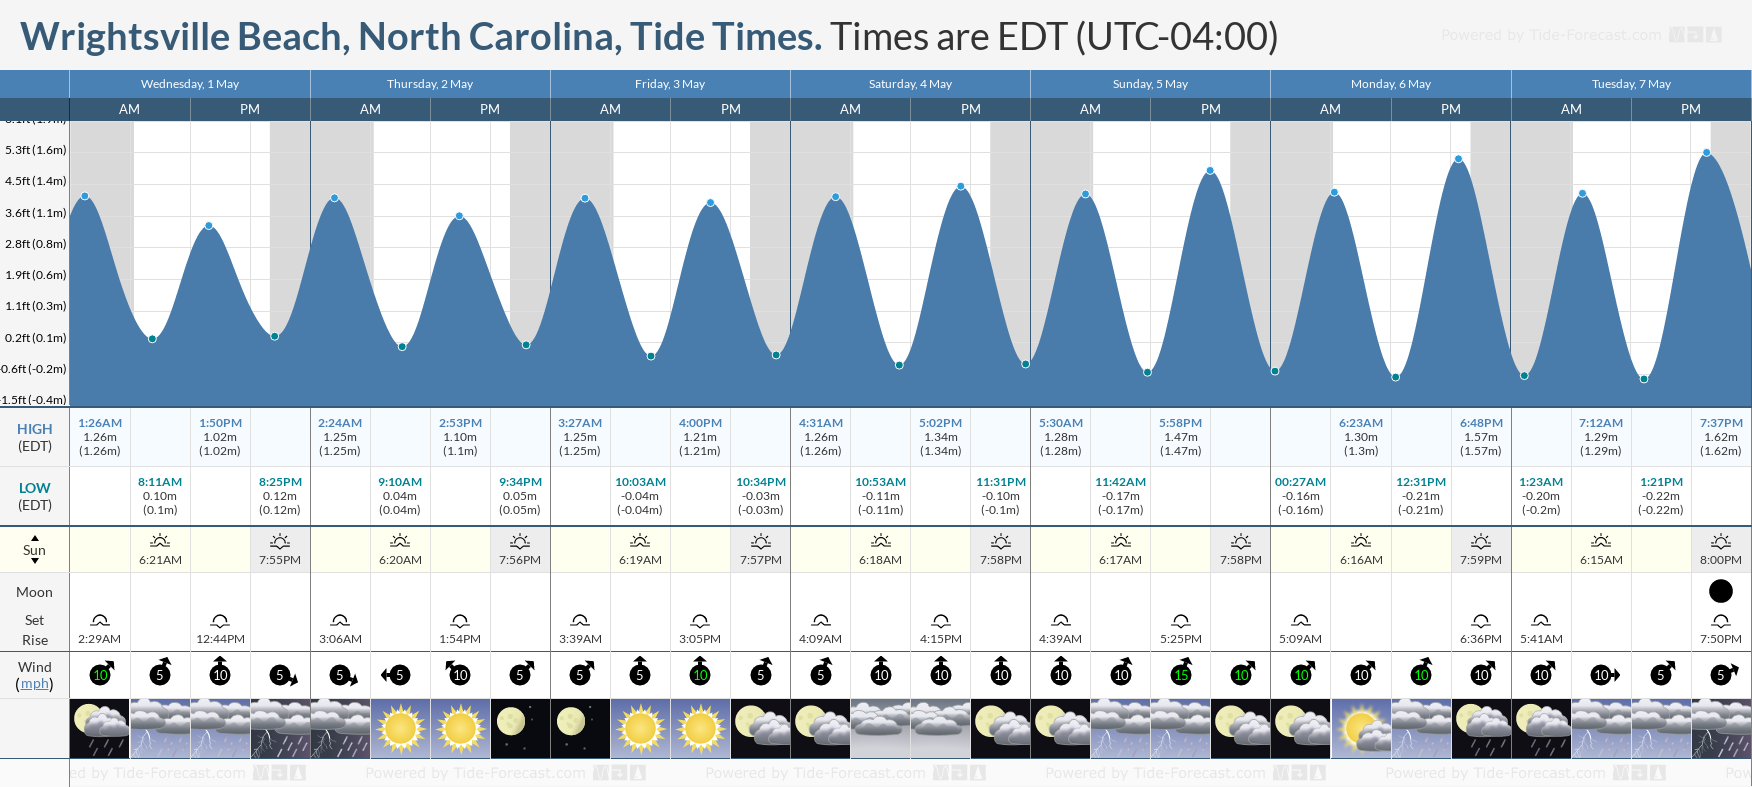 Wrightsville Beach, North Carolina Tide Chart including high and low tide tide times for the next 7 days